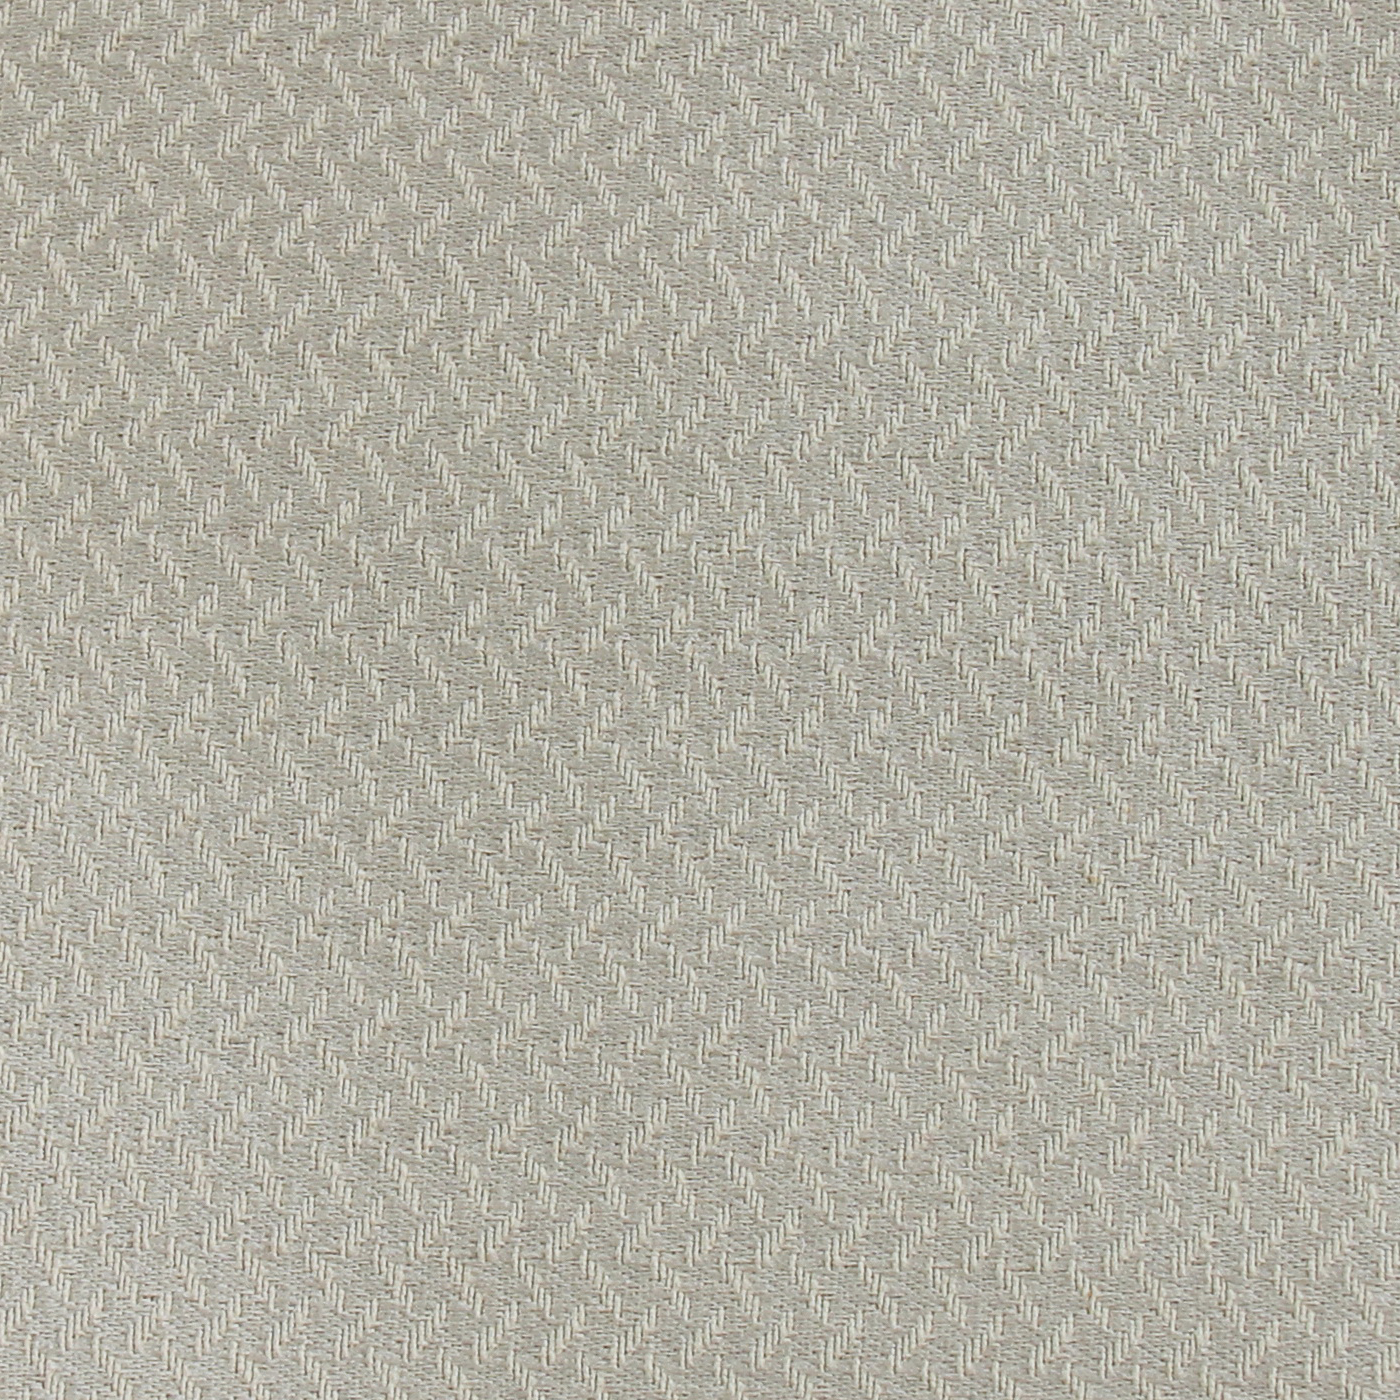 NO 30-45 RS X1 NO 15 Fabric Upholstery Sample